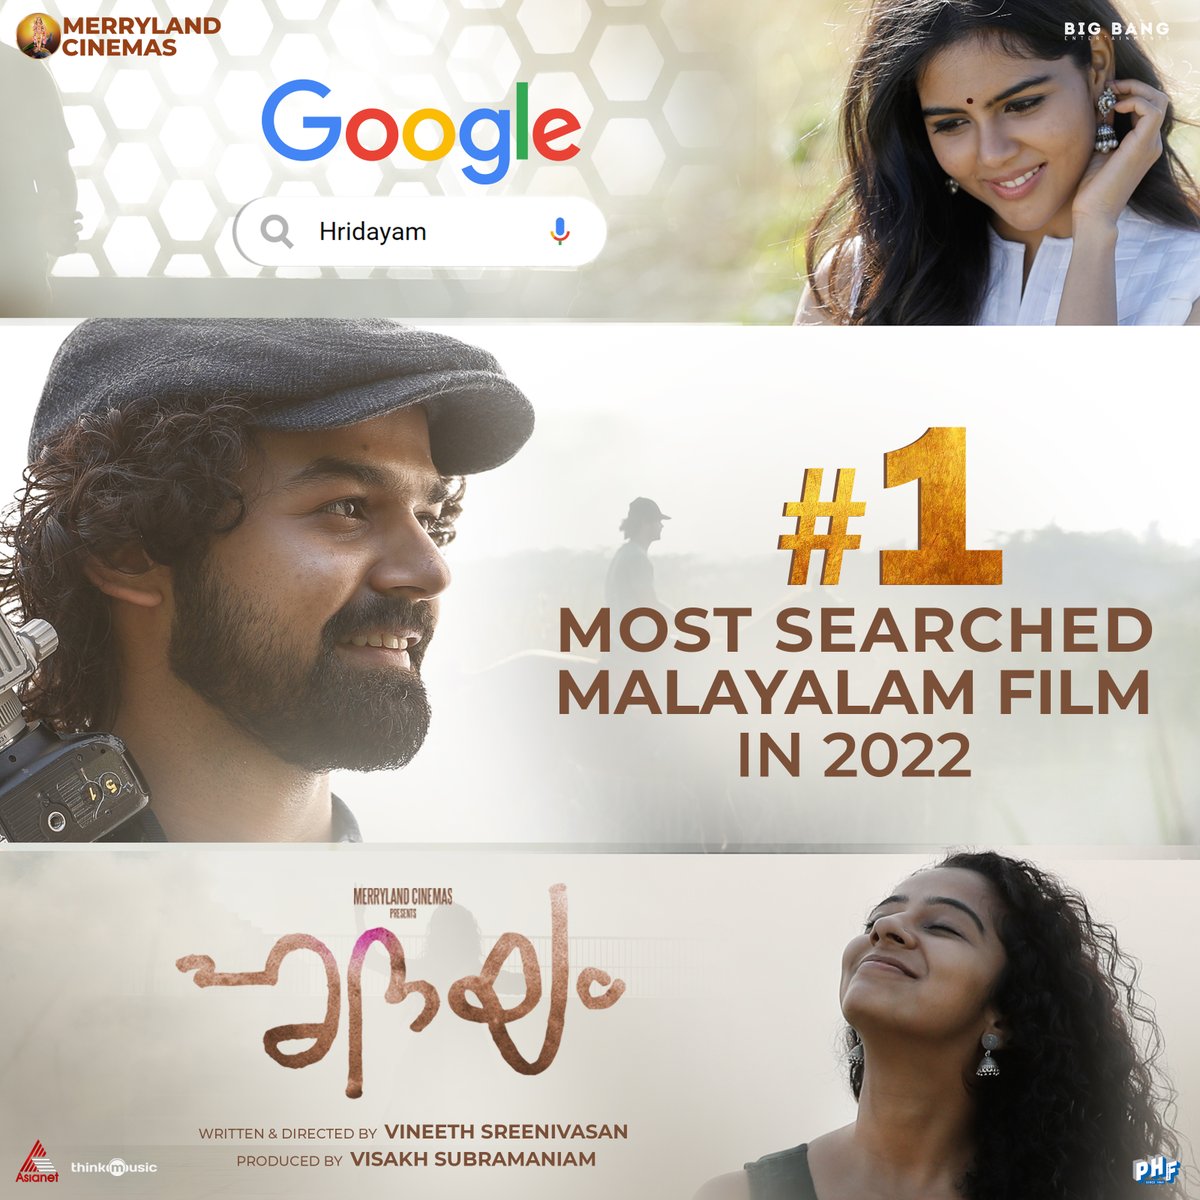 An absolute delight to spot #Hridayam topping Google's list of the Most Searched Malayalam Films of 2022! What an epic journey this has been! ♥️

#Google #MostSearchedFilms